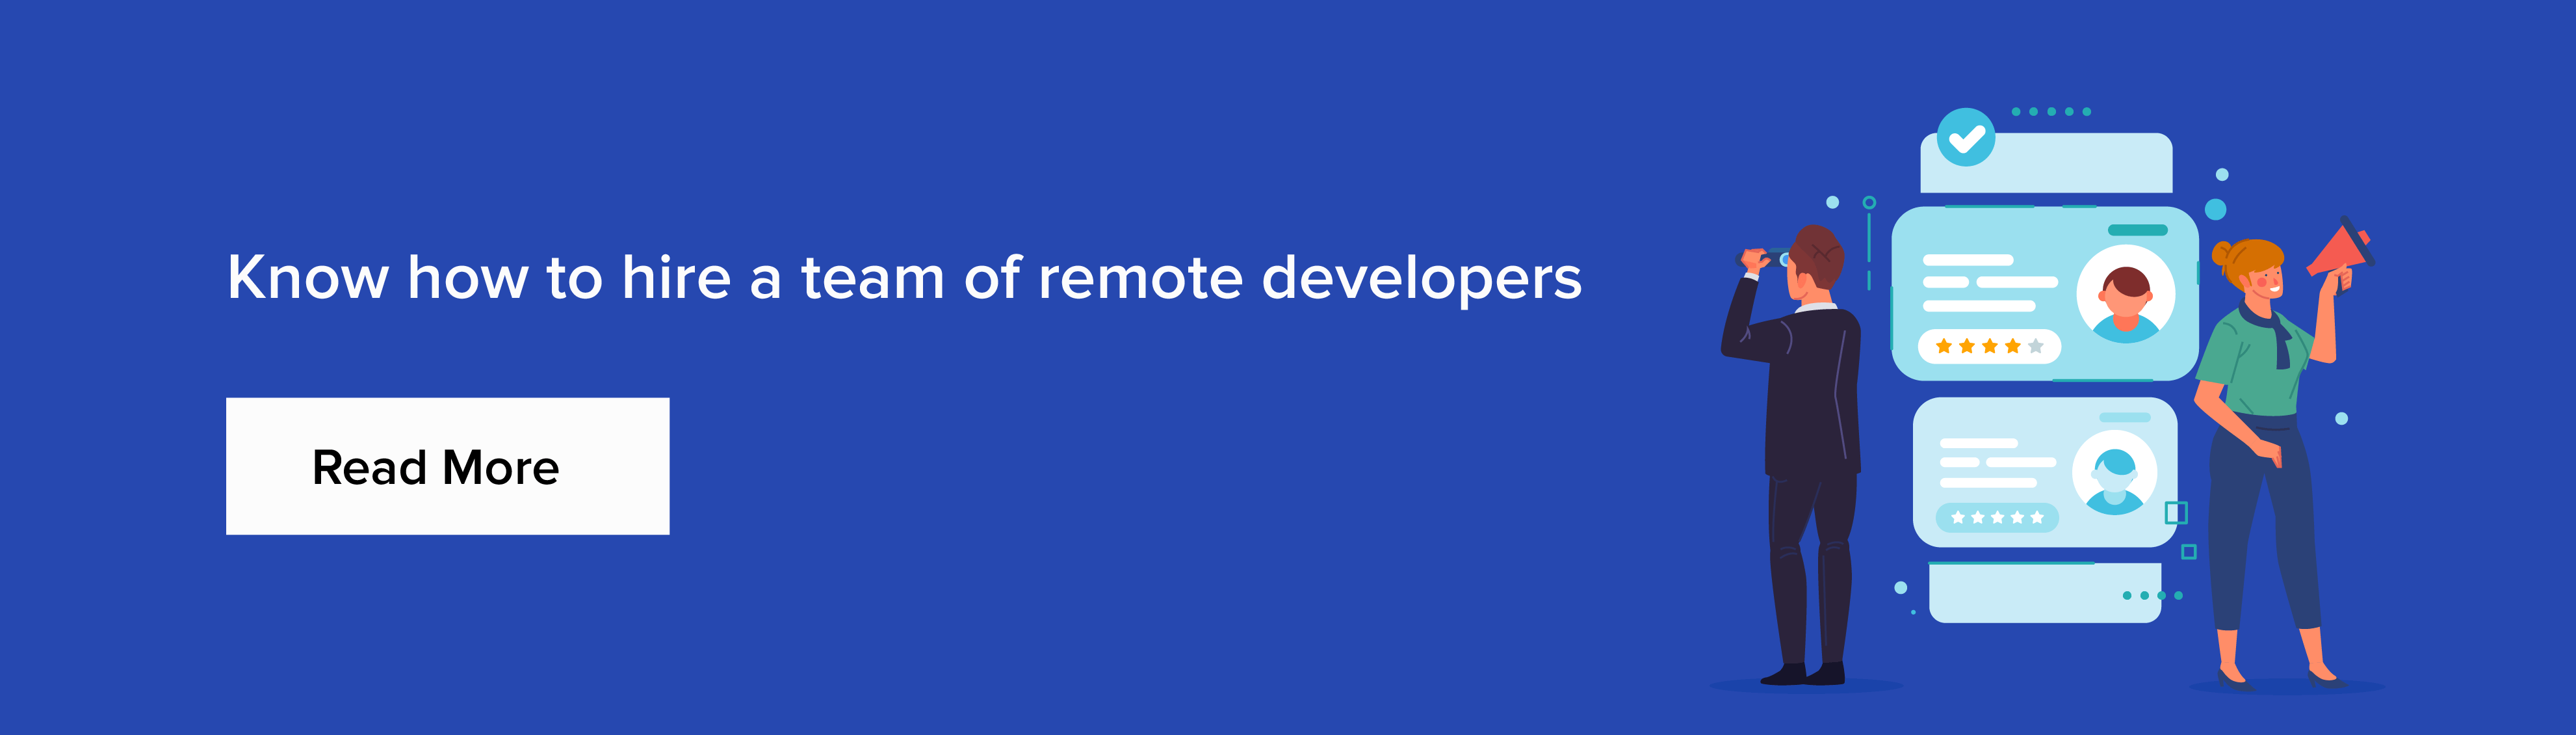 know how to hire remote developers